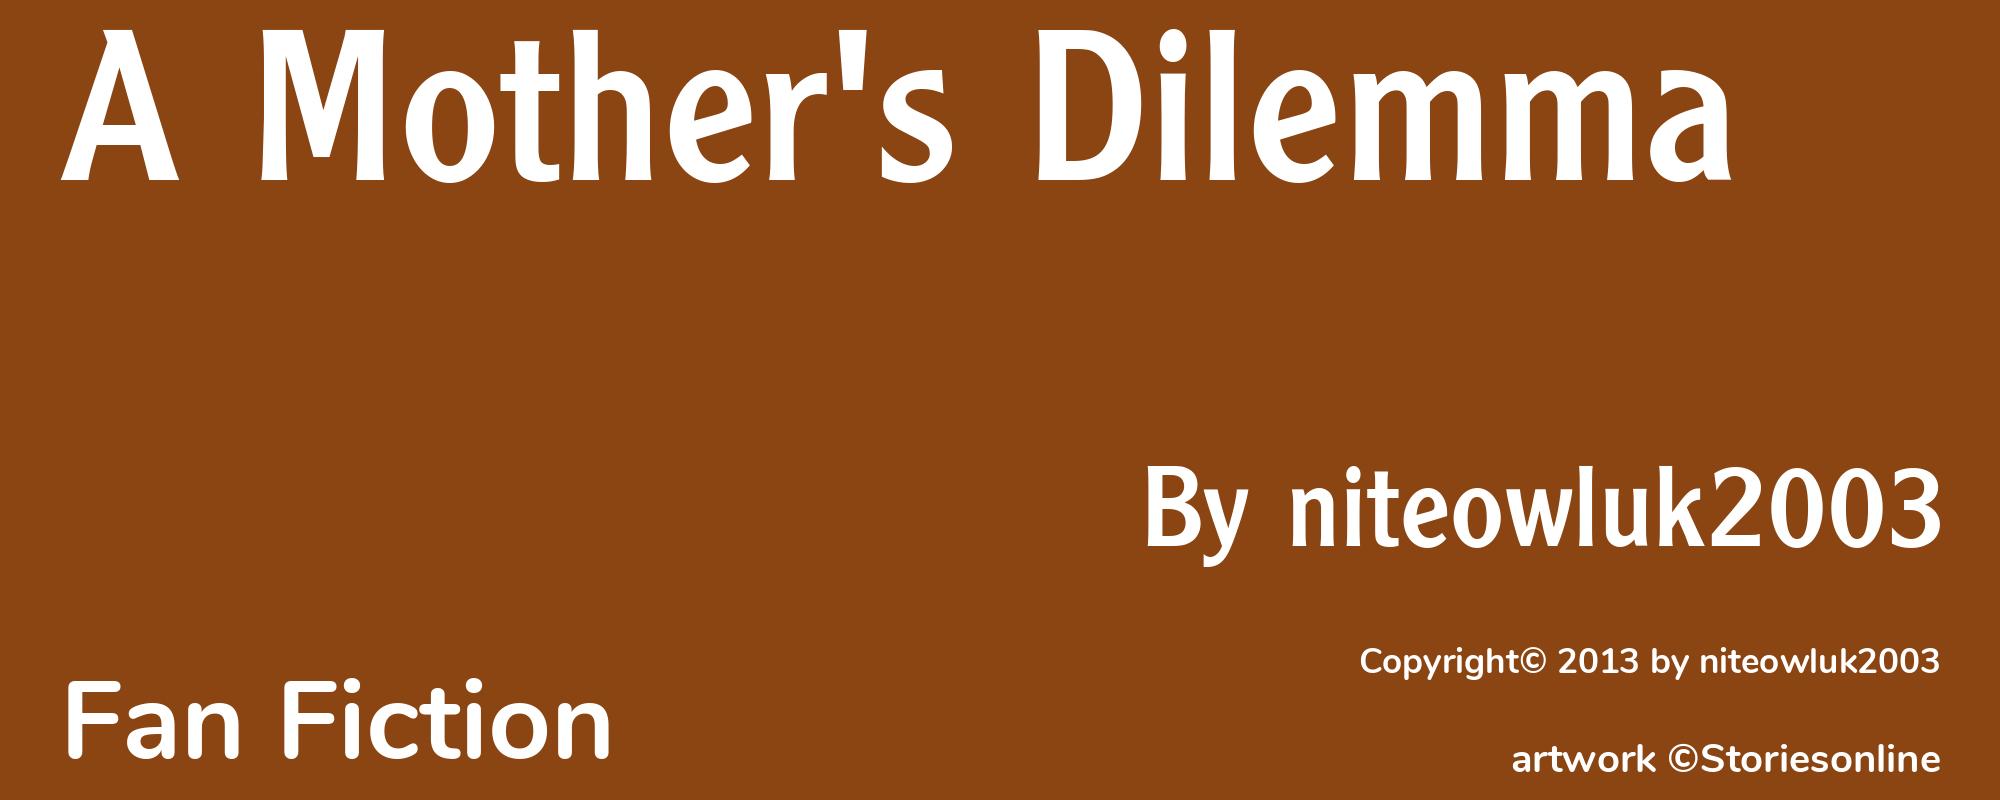 A Mother's Dilemma - Cover